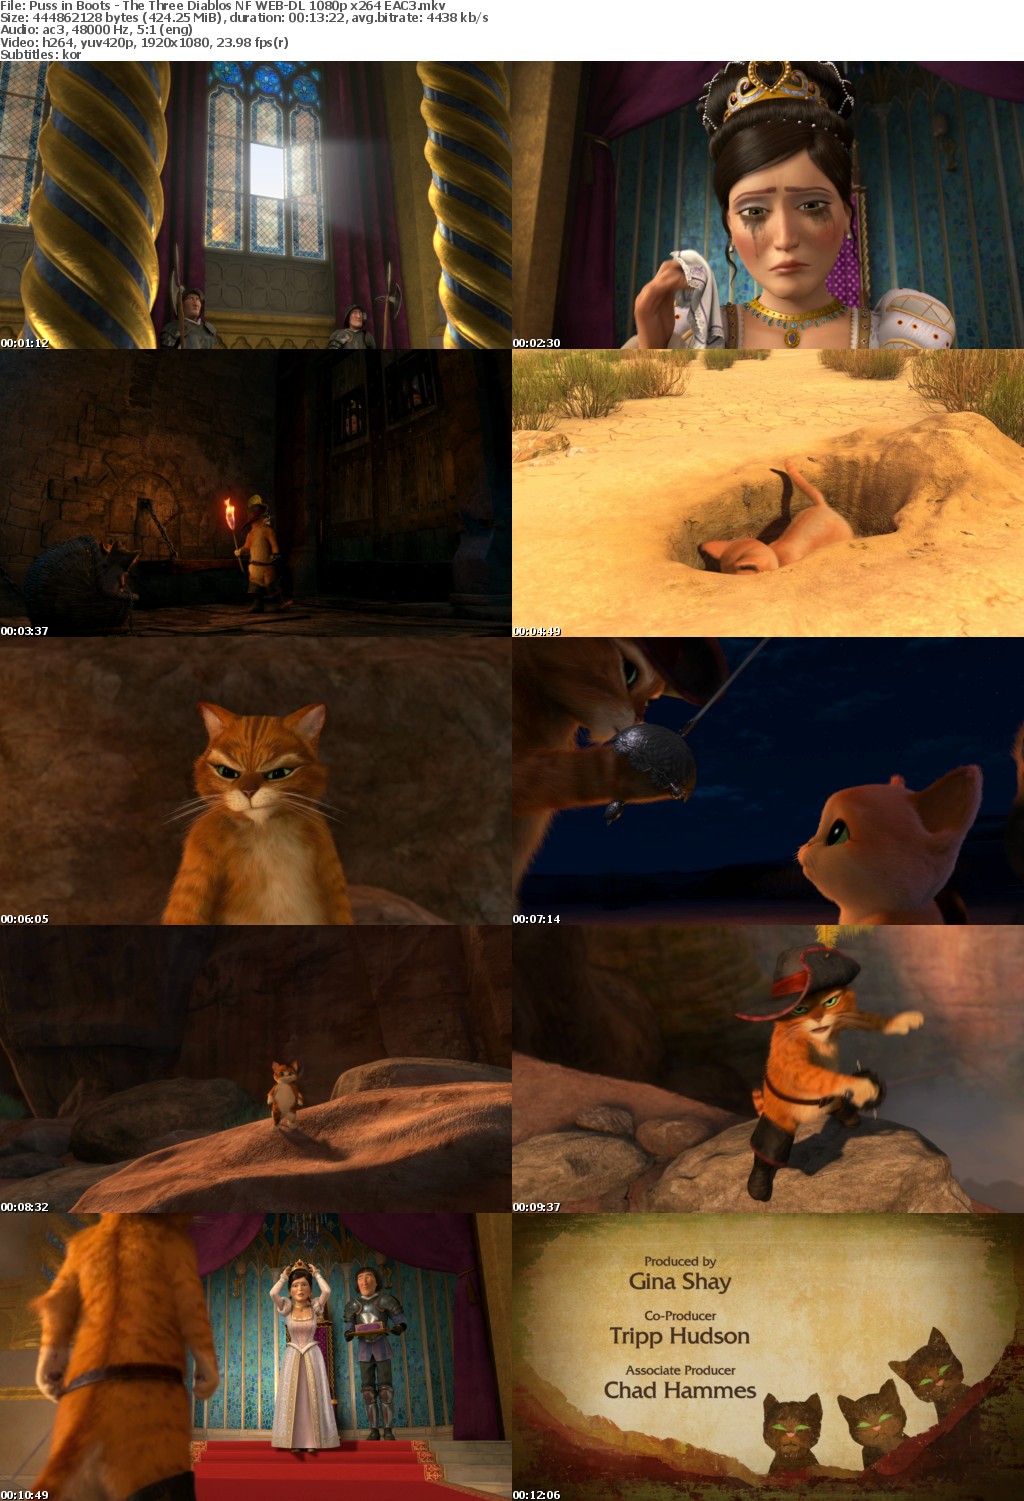 Puss in Boots - The Three Diablos NF WEB-DL 1080p x264 EAC3 mkv